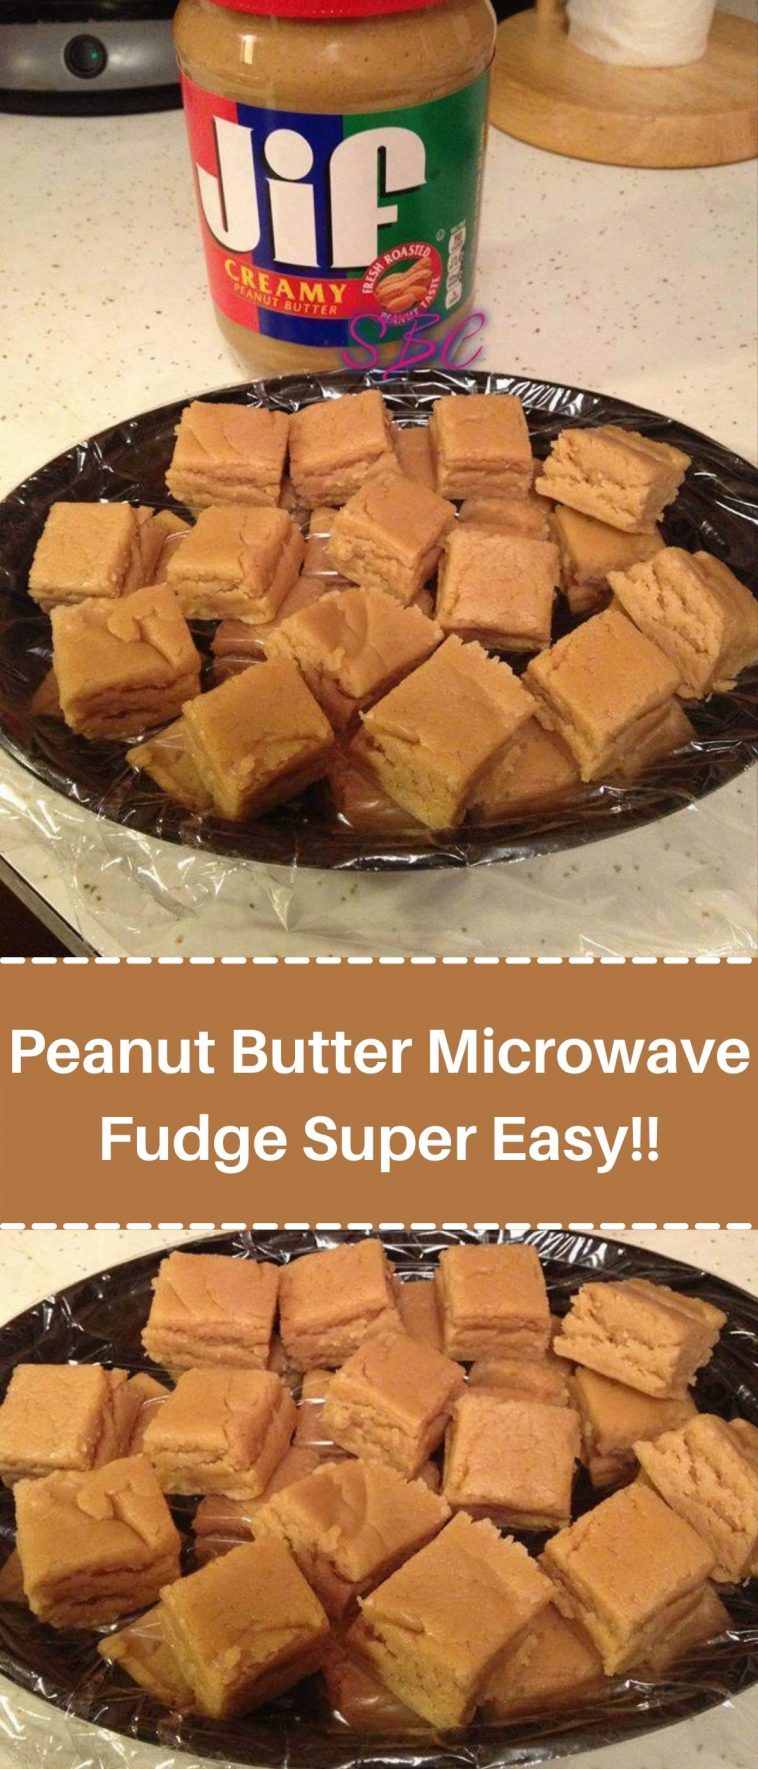 Peanut Butter Microwave Fudge  Super Quick and Easy!!